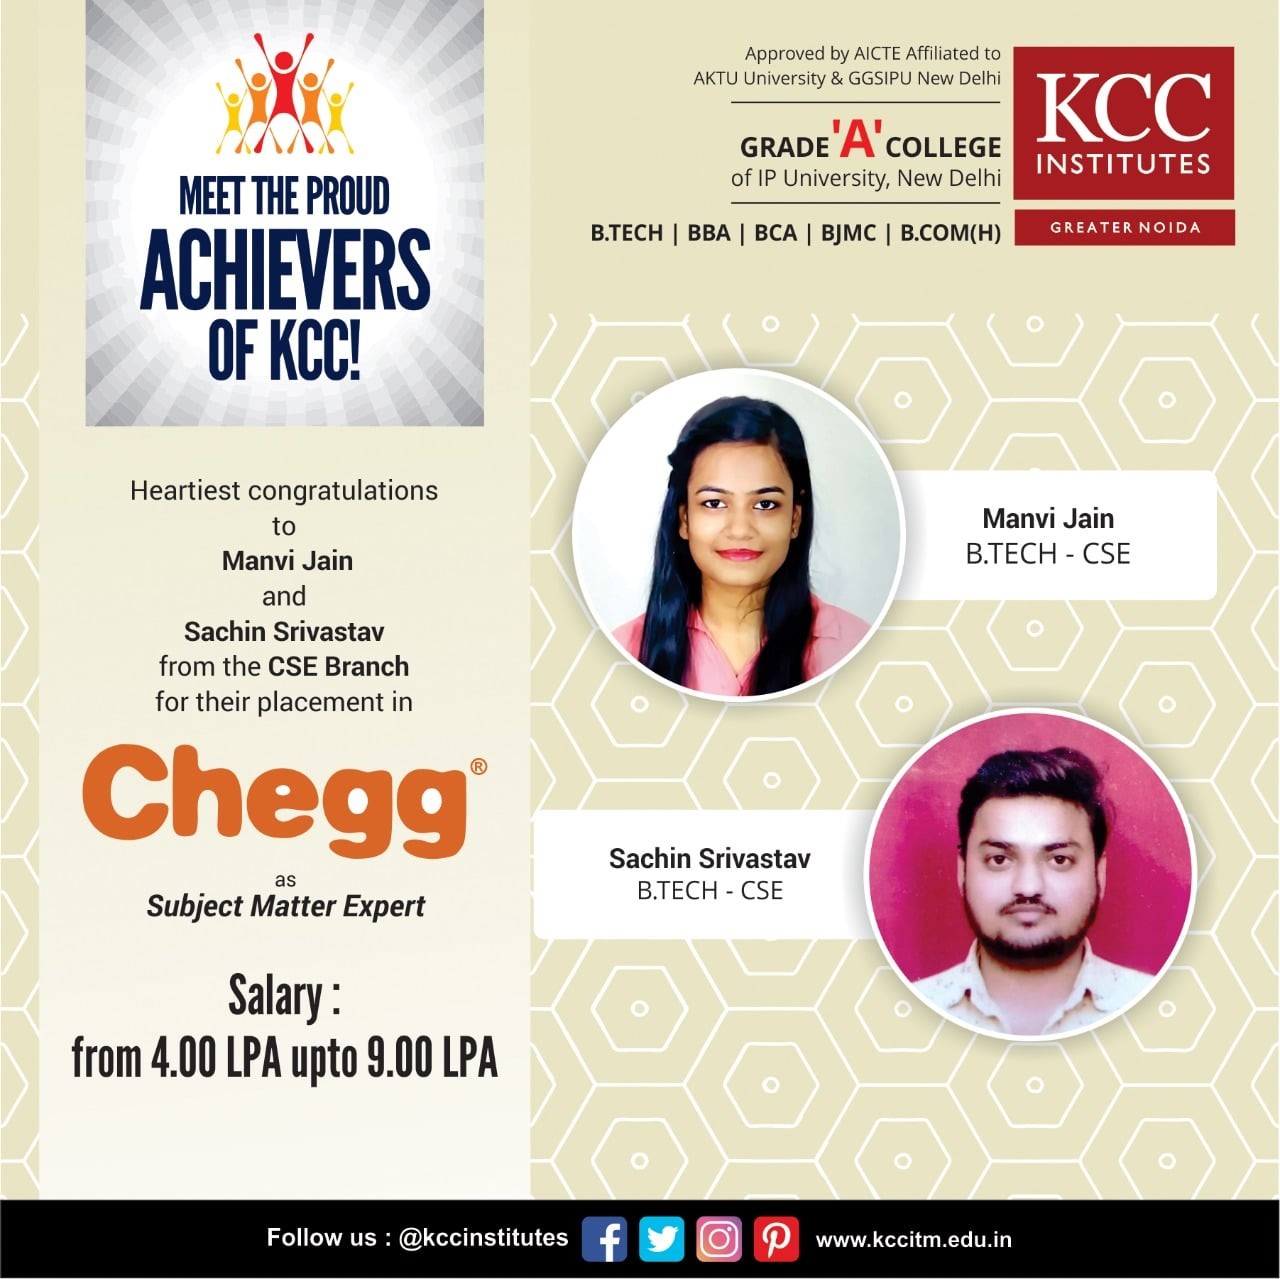 Congratulations to Manvi Jain and Sachin Srivastav from Btech CSE Branch for getting placed in Chegg as Subject Matter Expert.